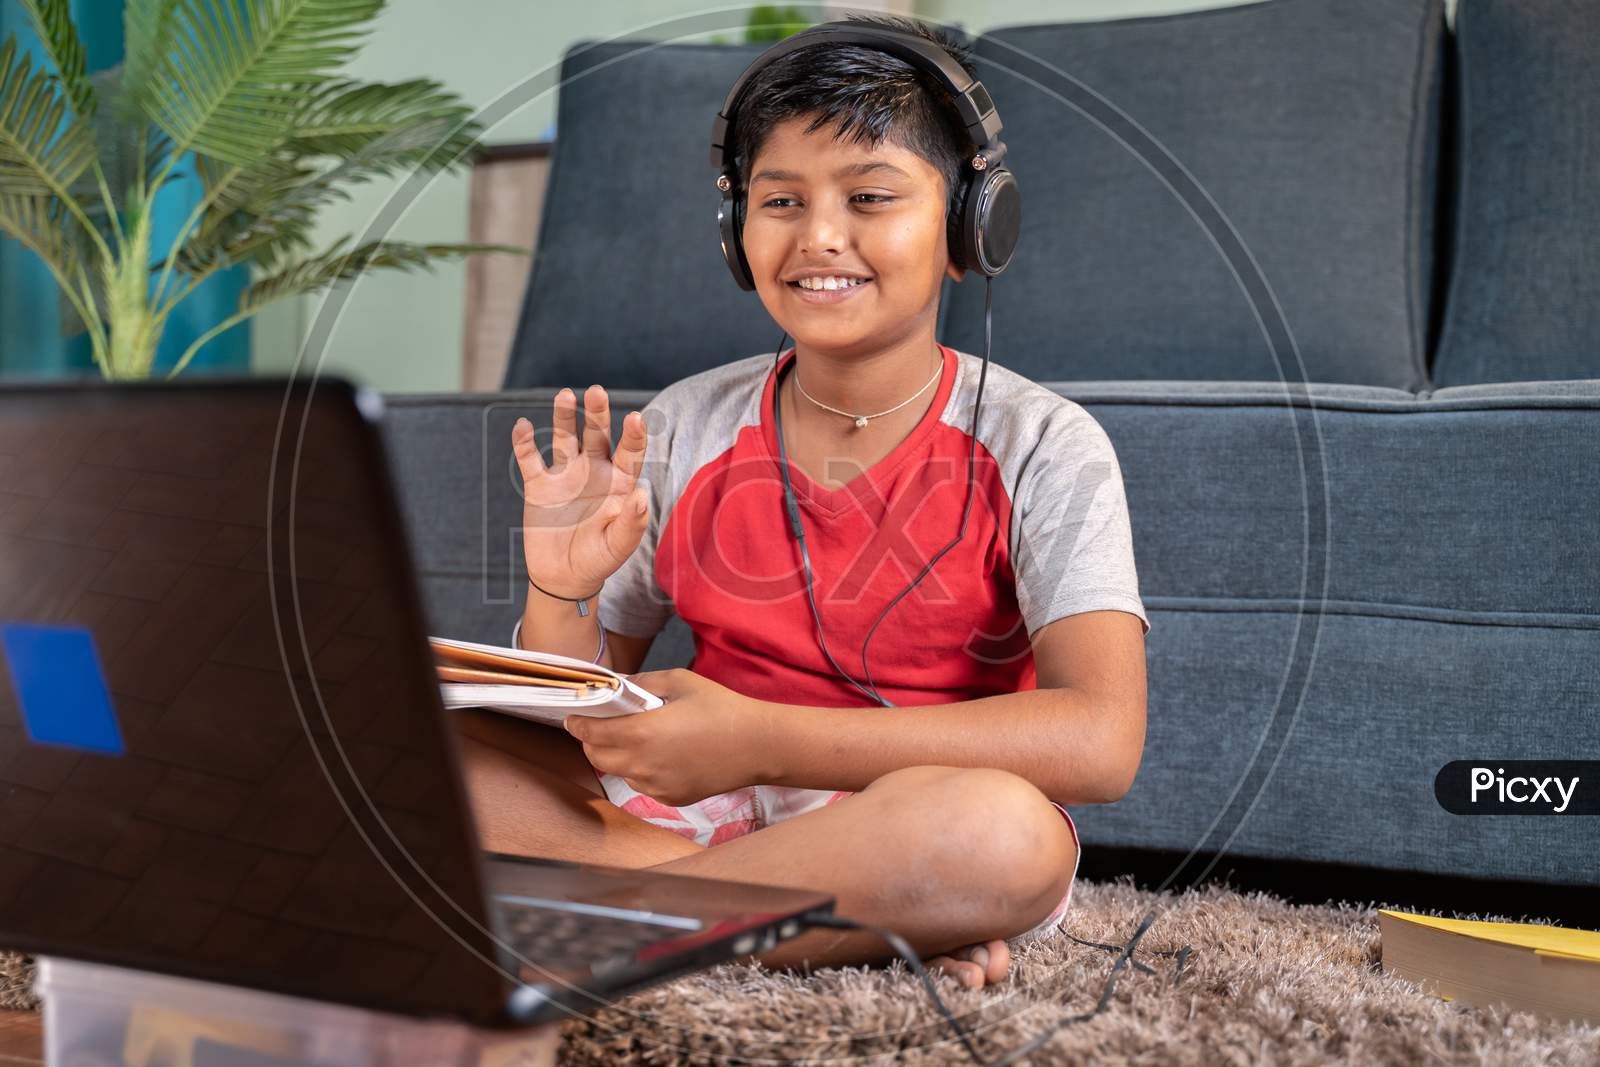 Young Kid With Headphones And Books In Handphone Greeting His Tutor During Online Class On Laptop At Home - Concept Of Virtual Educatiom, Homeschooling And New Normal During Coronavirus Pandemic.